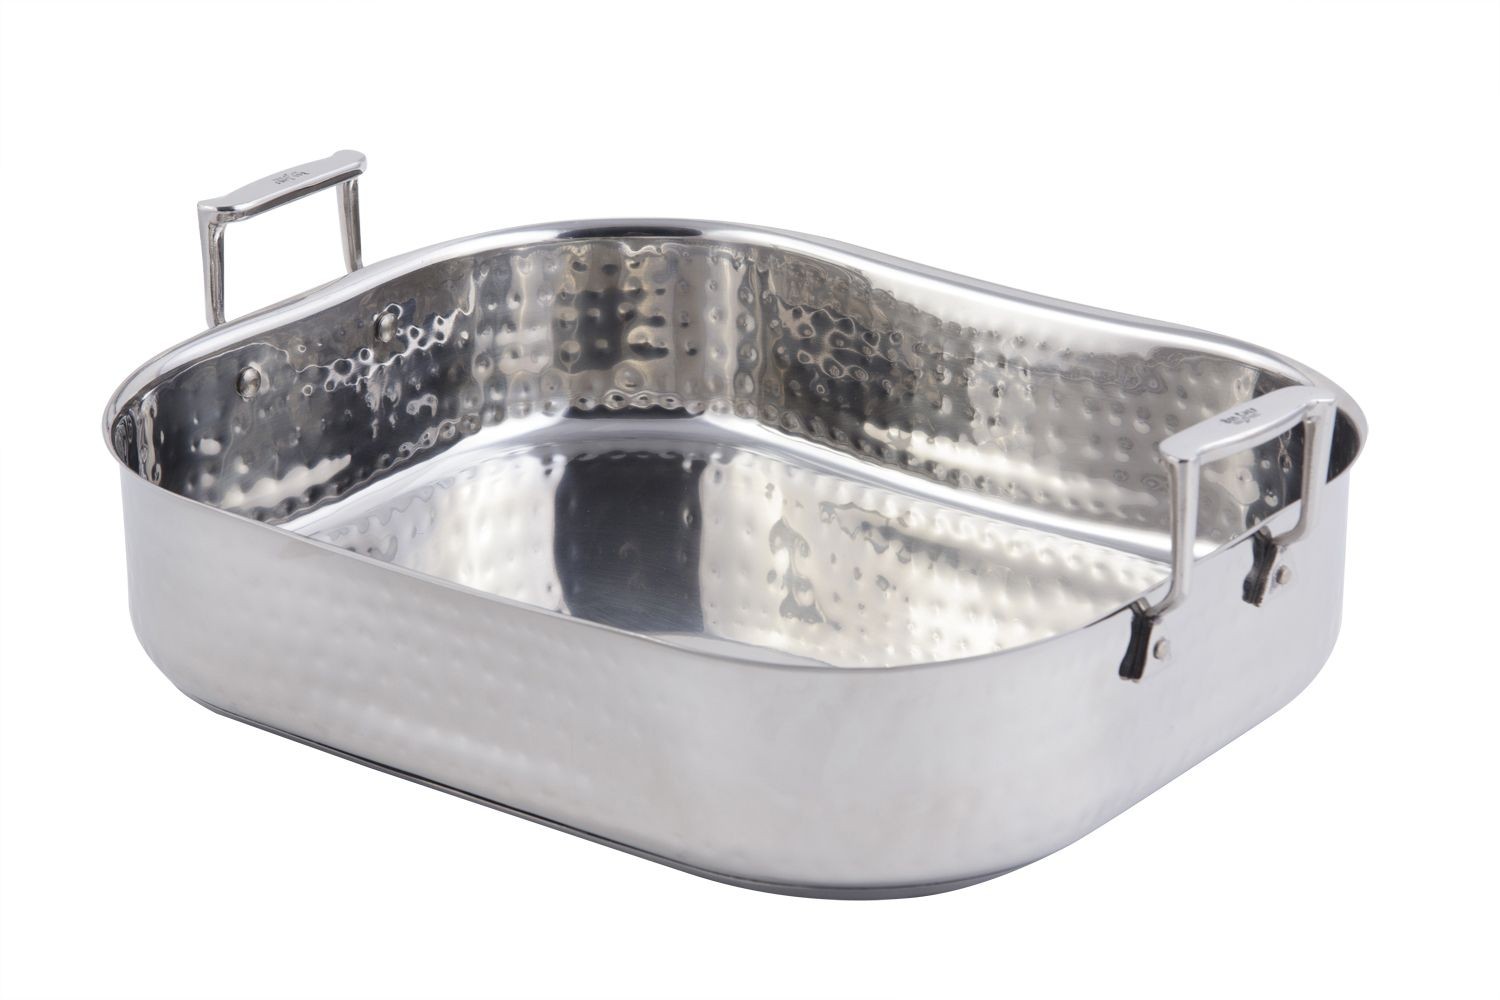 Bon Chef 60010CLDHF Cucina Stainless Steel Rotisserie Pan, Hammered Finish, 10 Qt.